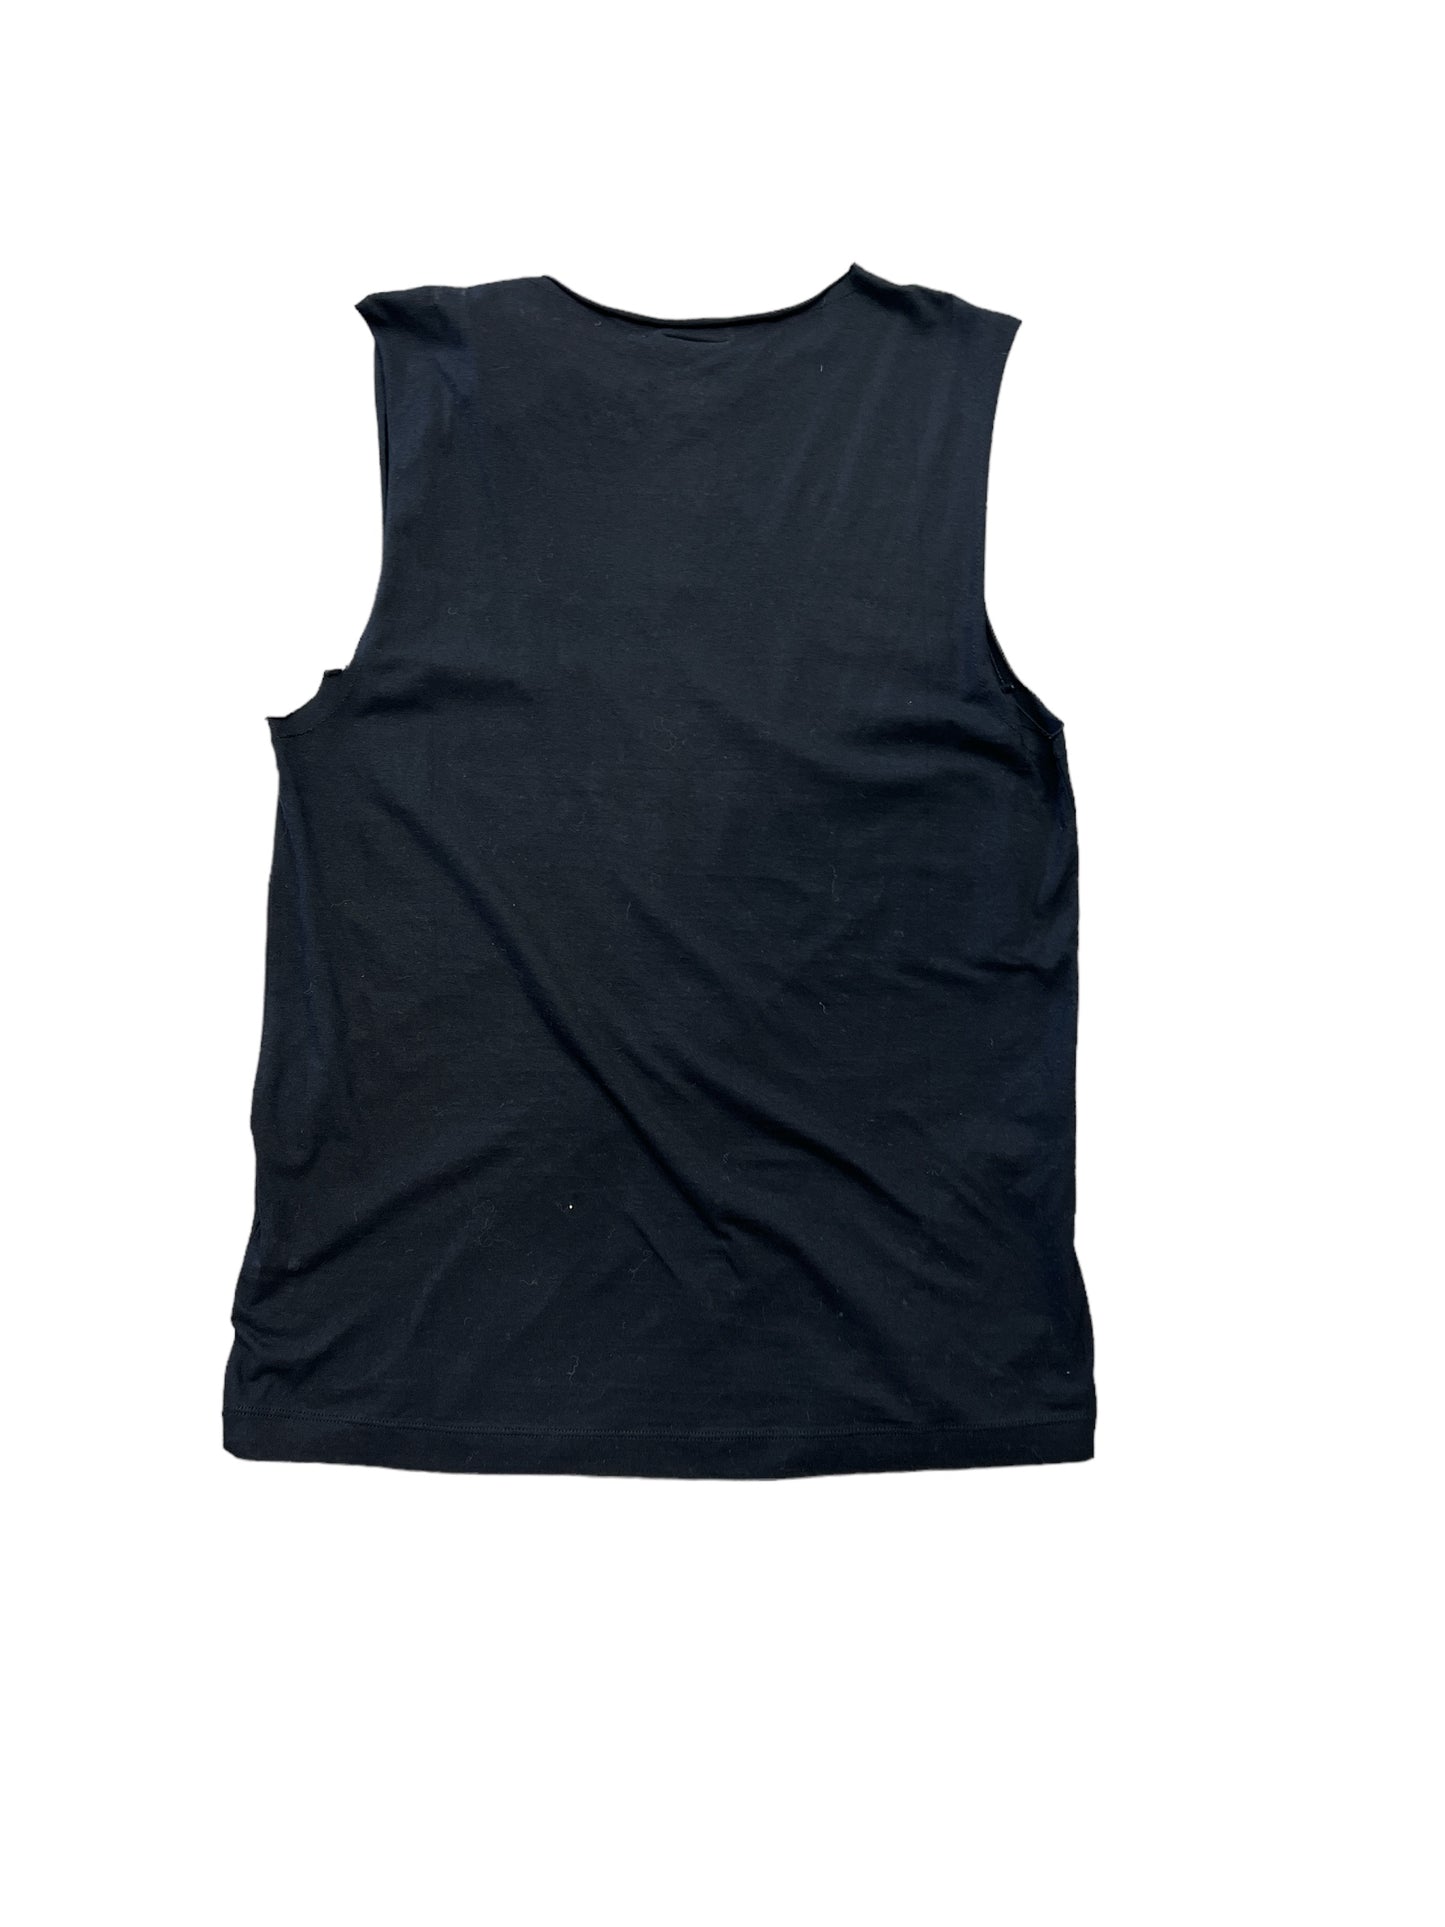 Top Sleeveless By Helmut Lang  Size: Xs